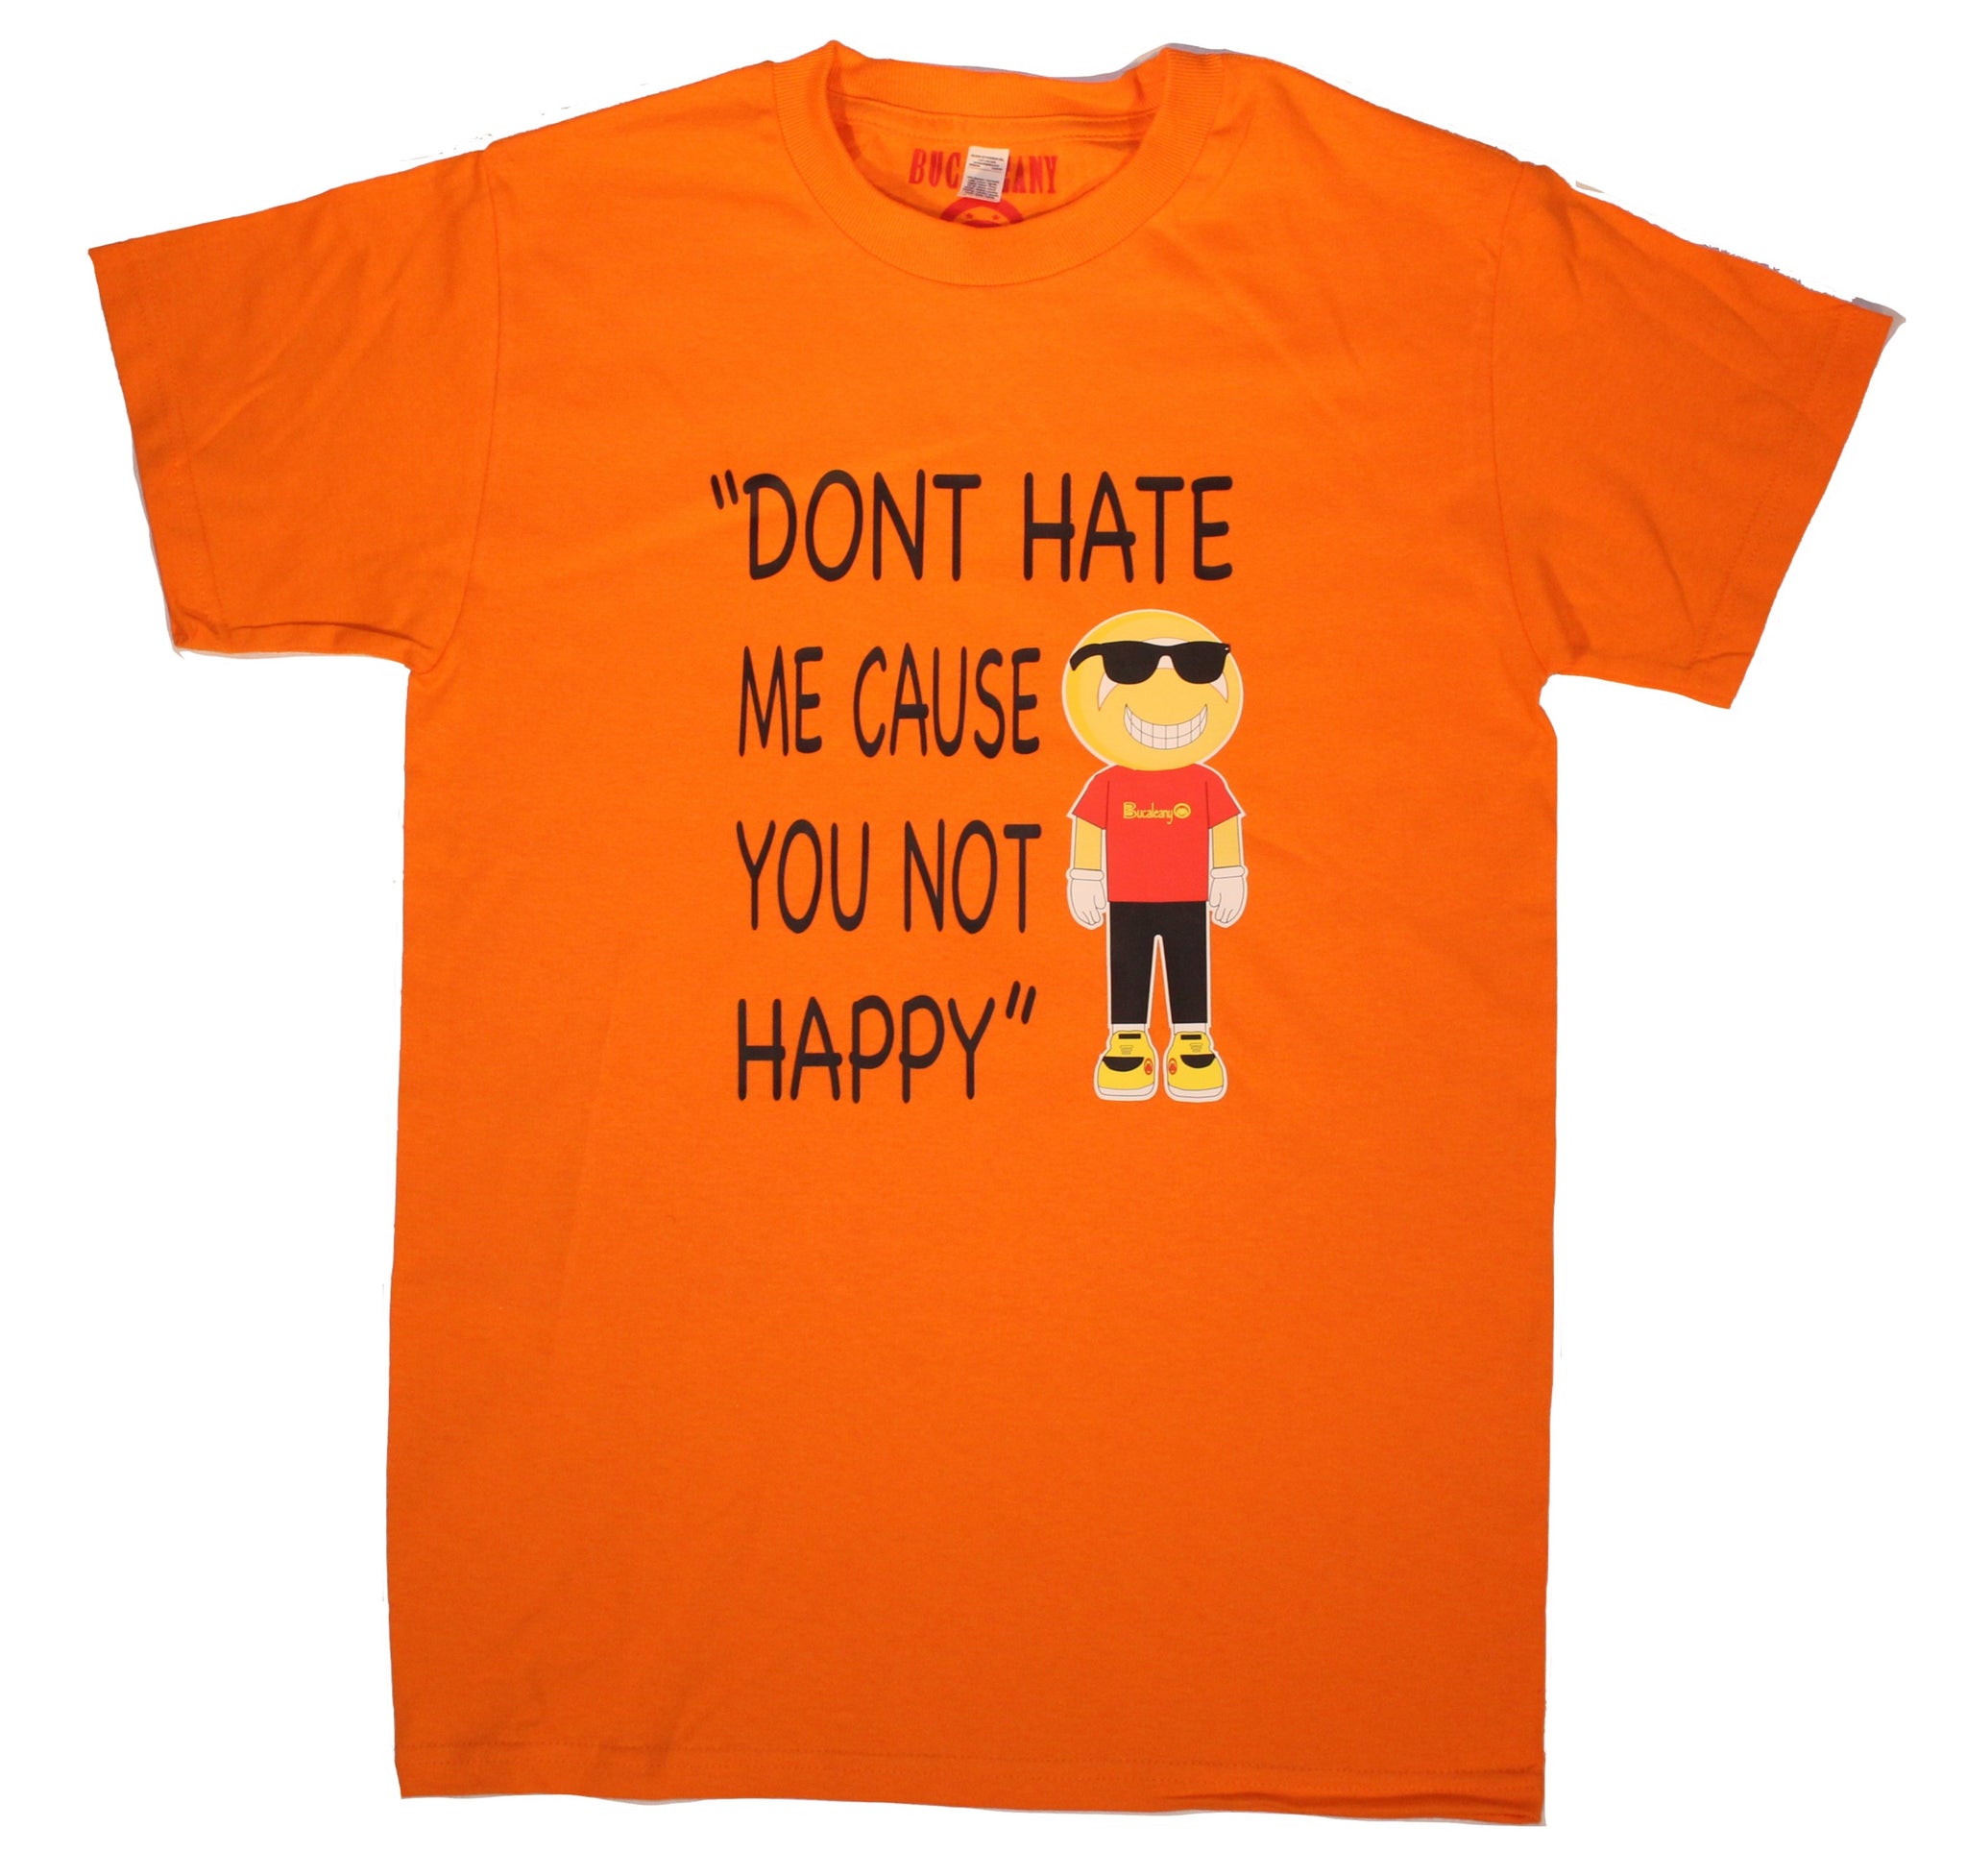 NEW Bucaleany "DON'T HATE ME CAUSE YOU NOT HAPPY" Orange T-shirt